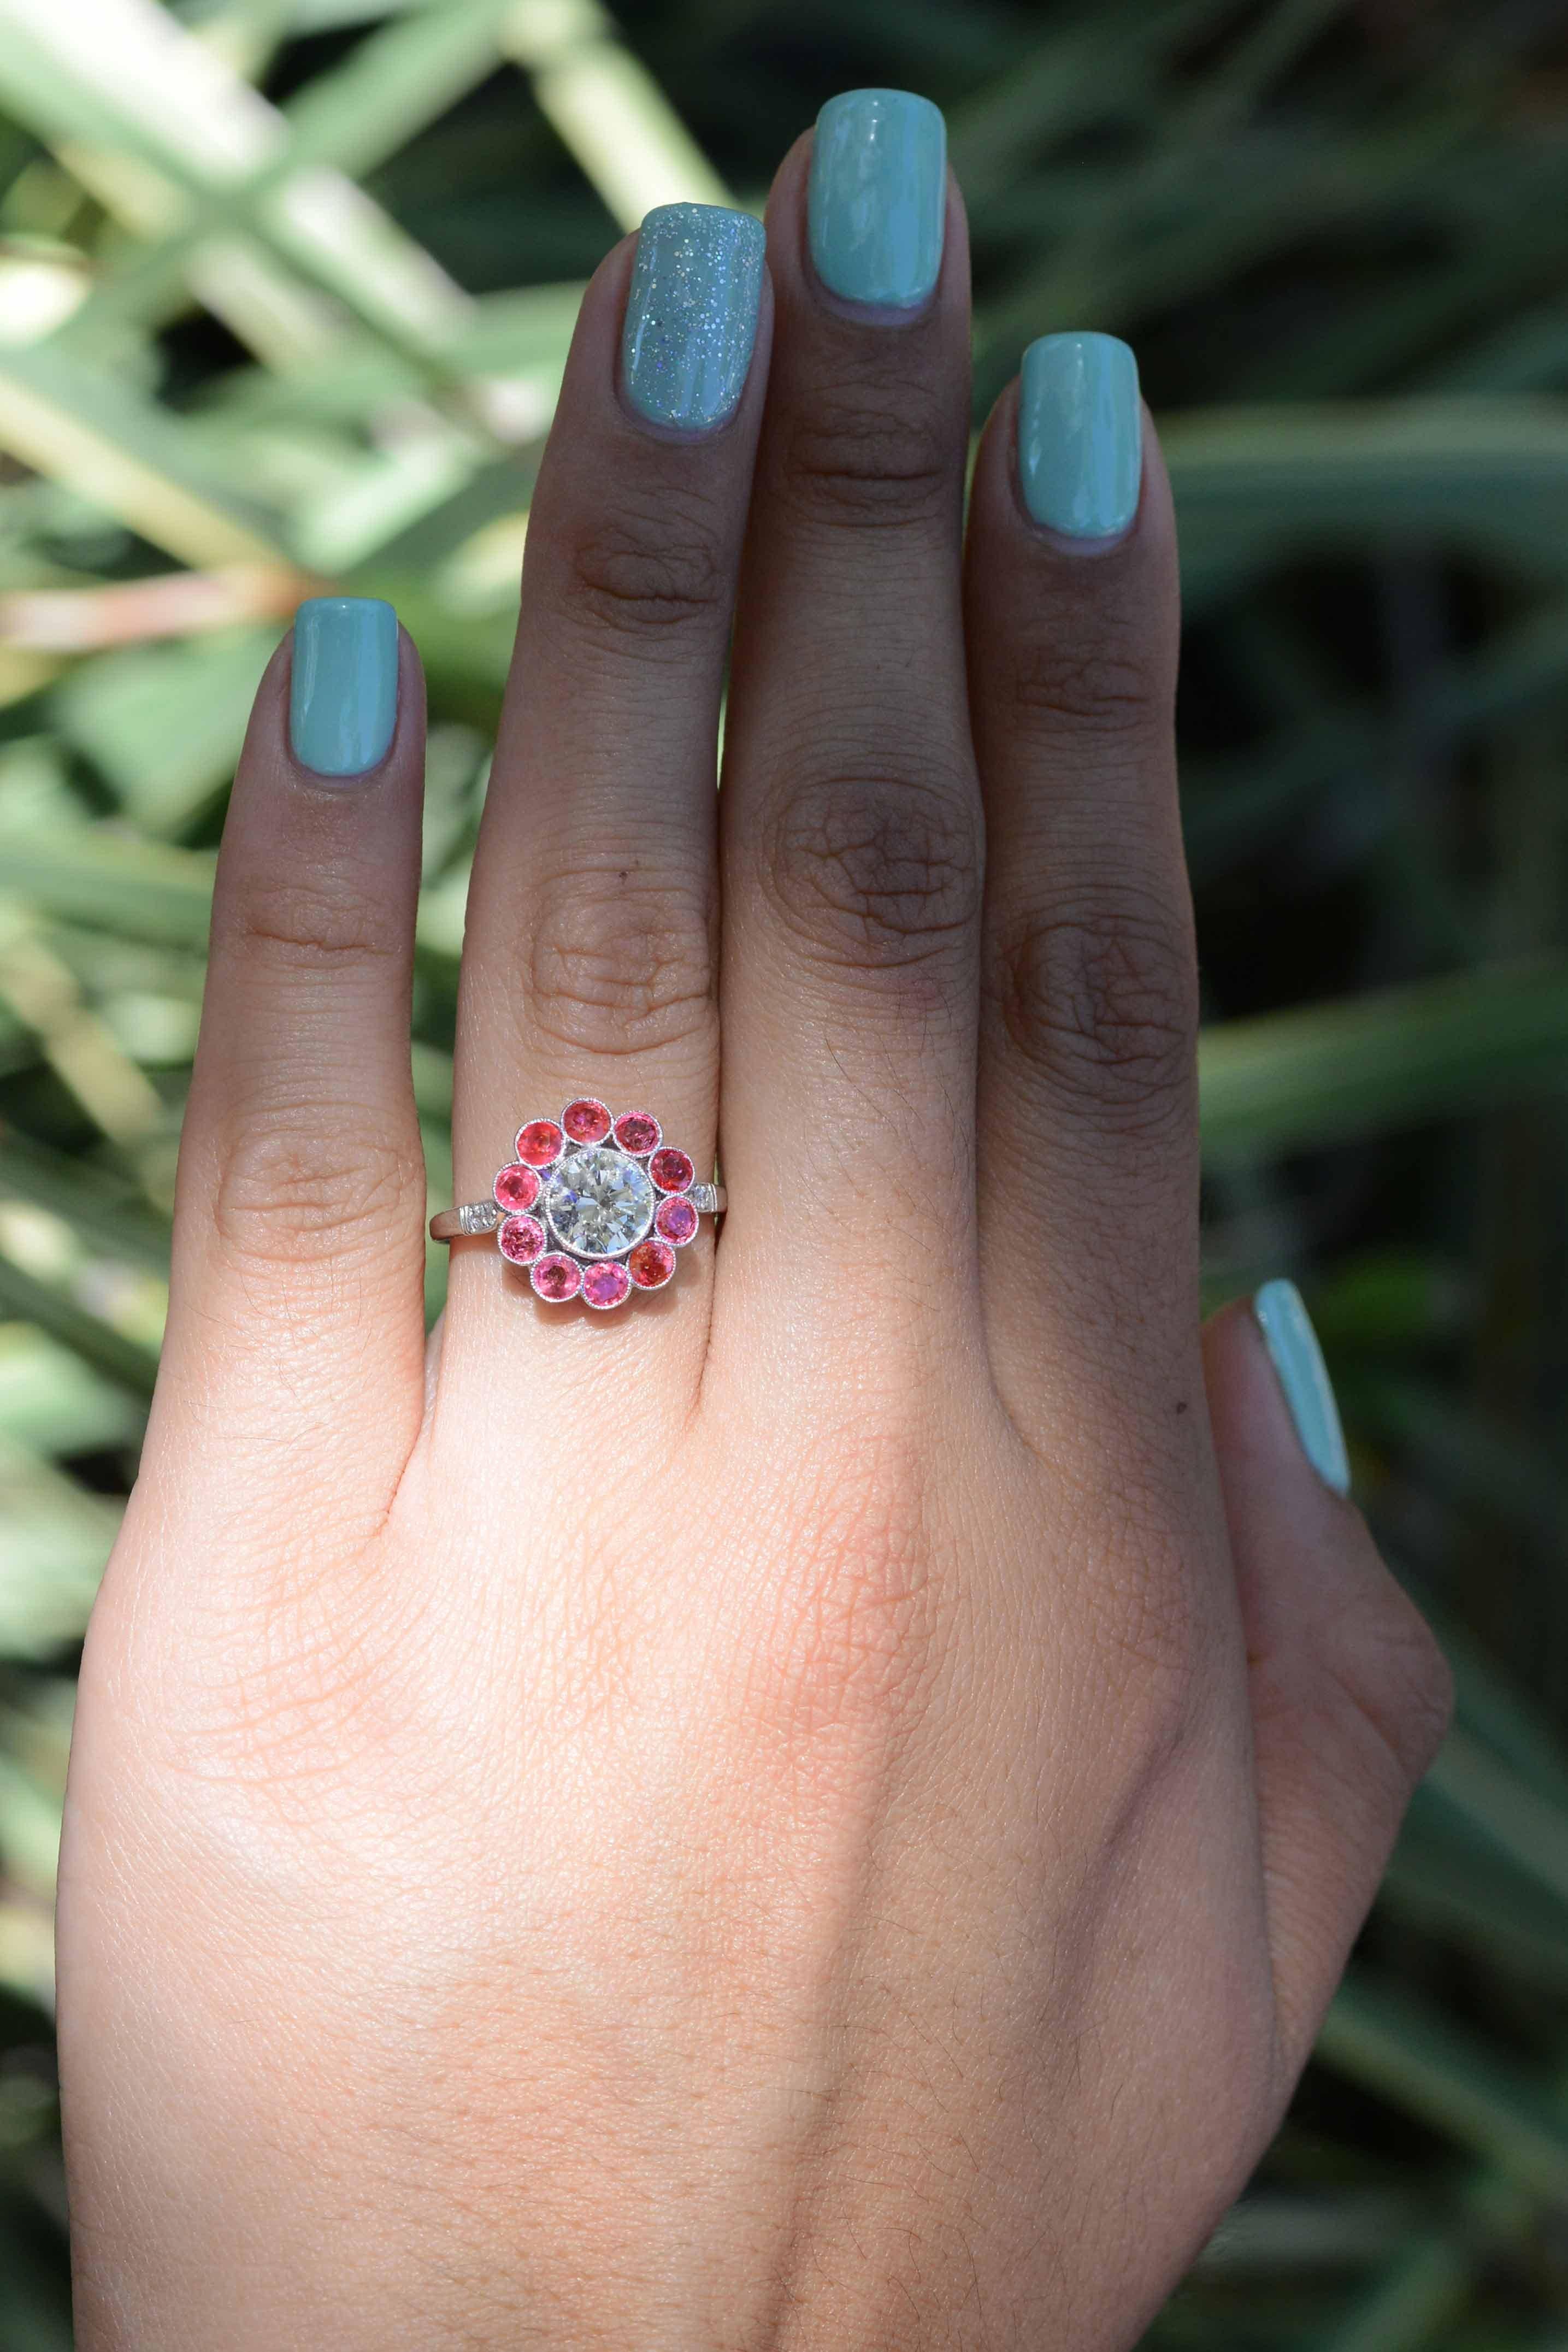 This diamond and ruby halo flower engagement ring throws a subtle twist on a classic design. Centered by a dazzling round brilliant cut diamond of 1.11 carats and adorned with 10 bright ruby 